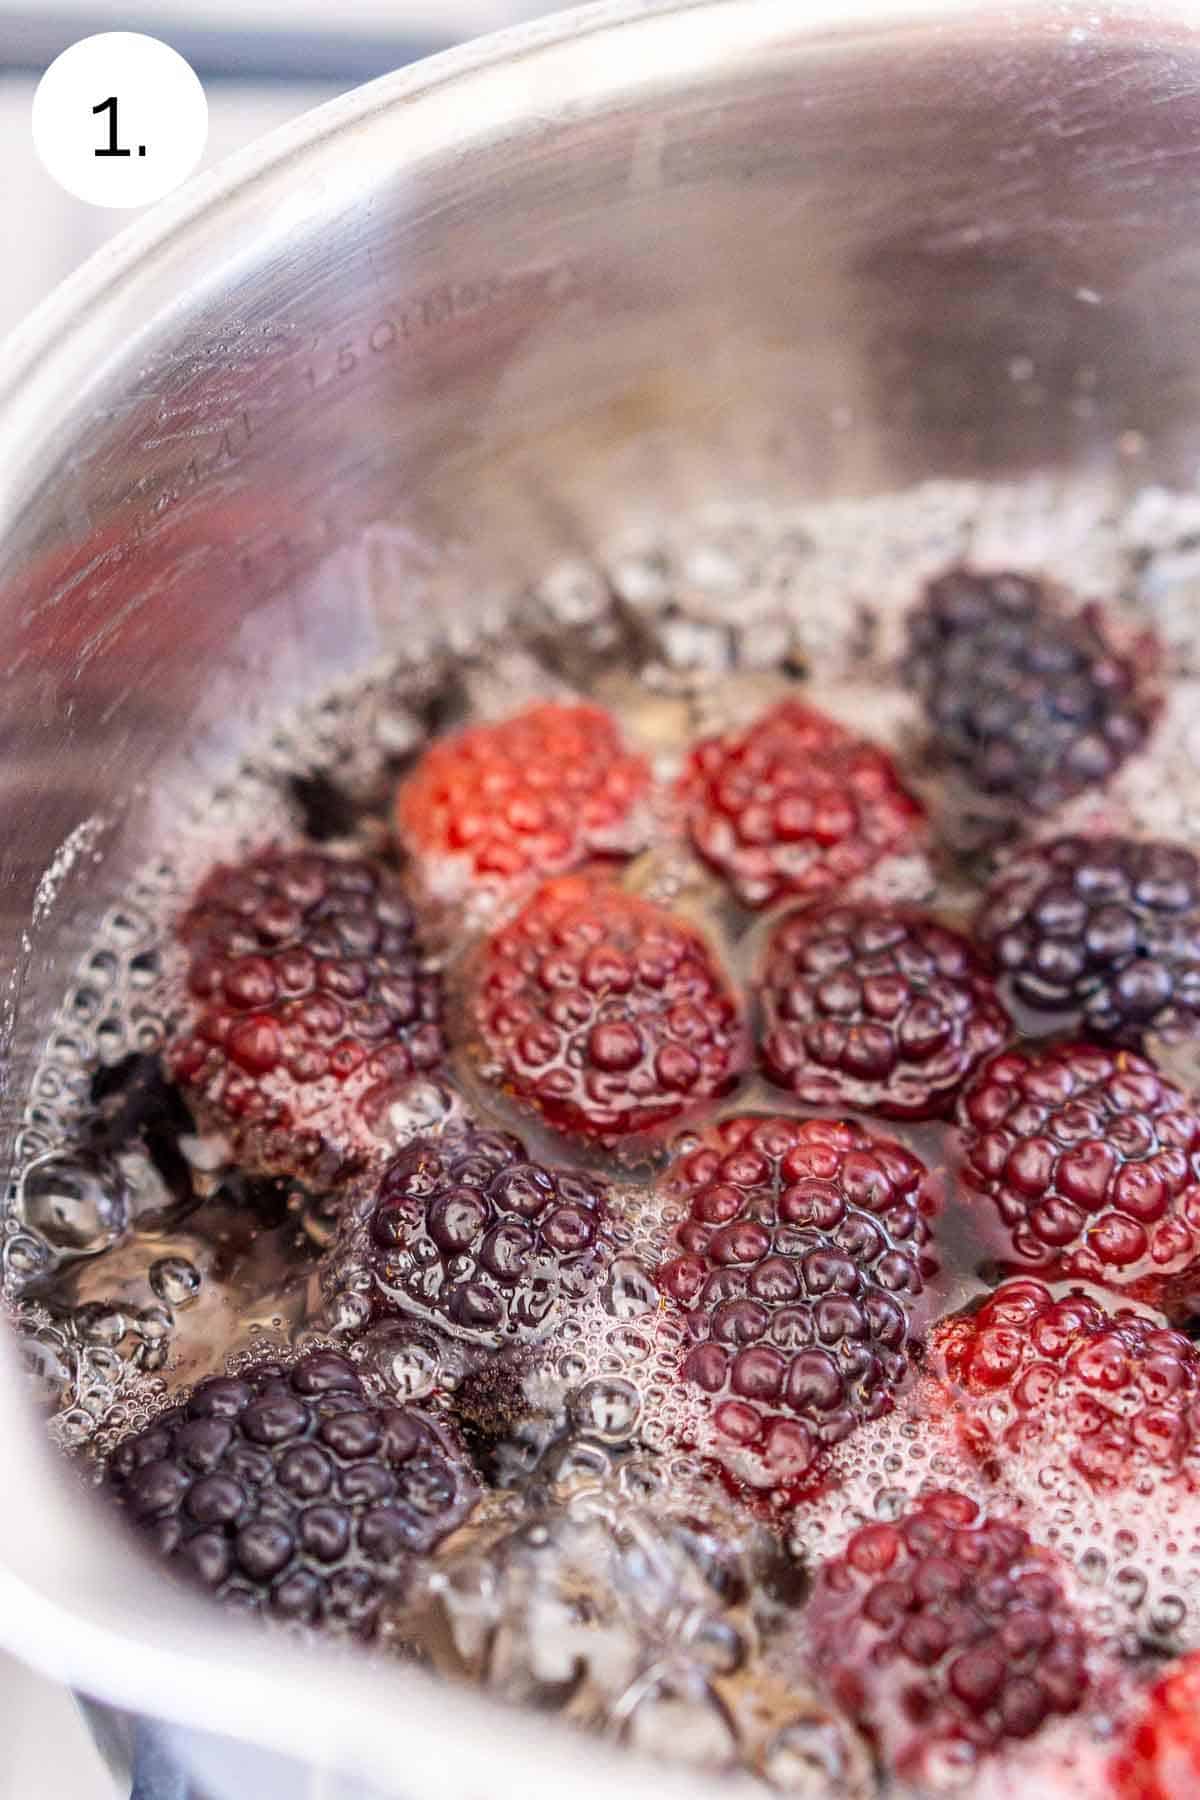 The blackberries, water and sugar boiling in a small stainless steel saucepan on the stove.